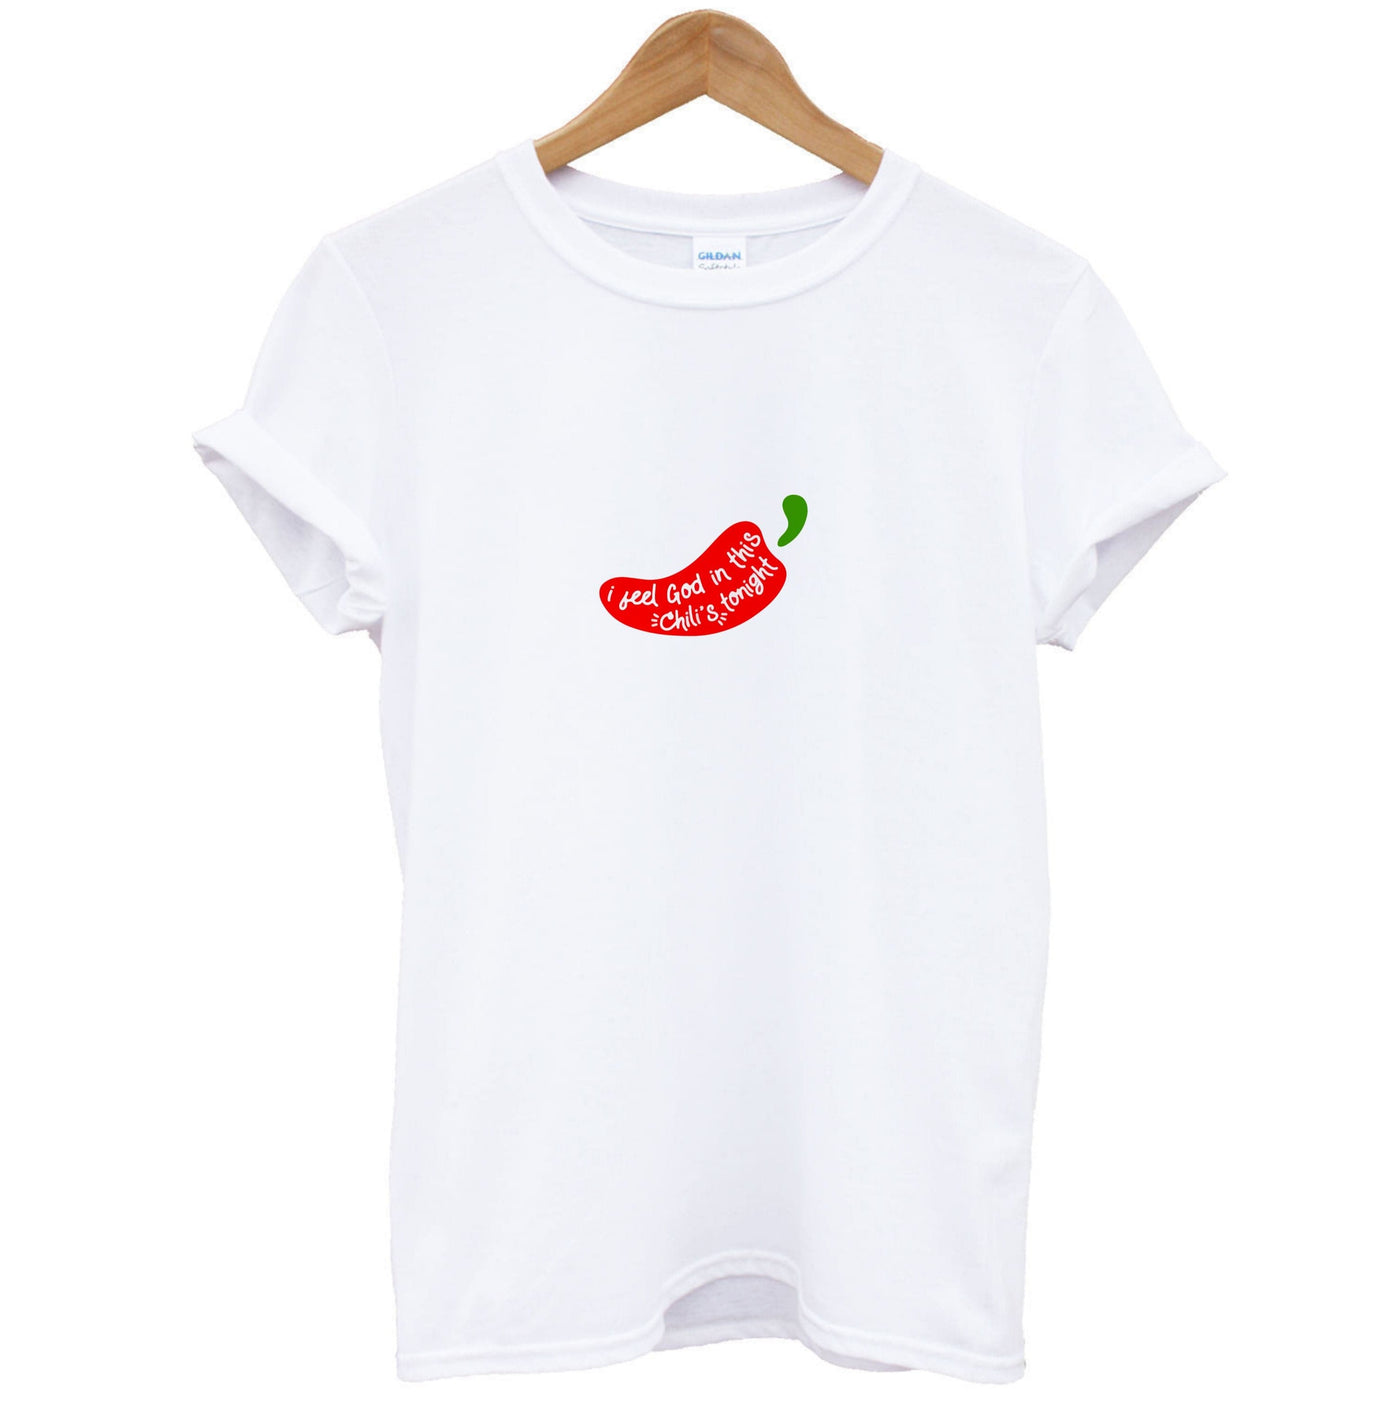 I Feel God In This Chilli's Tonight - The Office T-Shirt